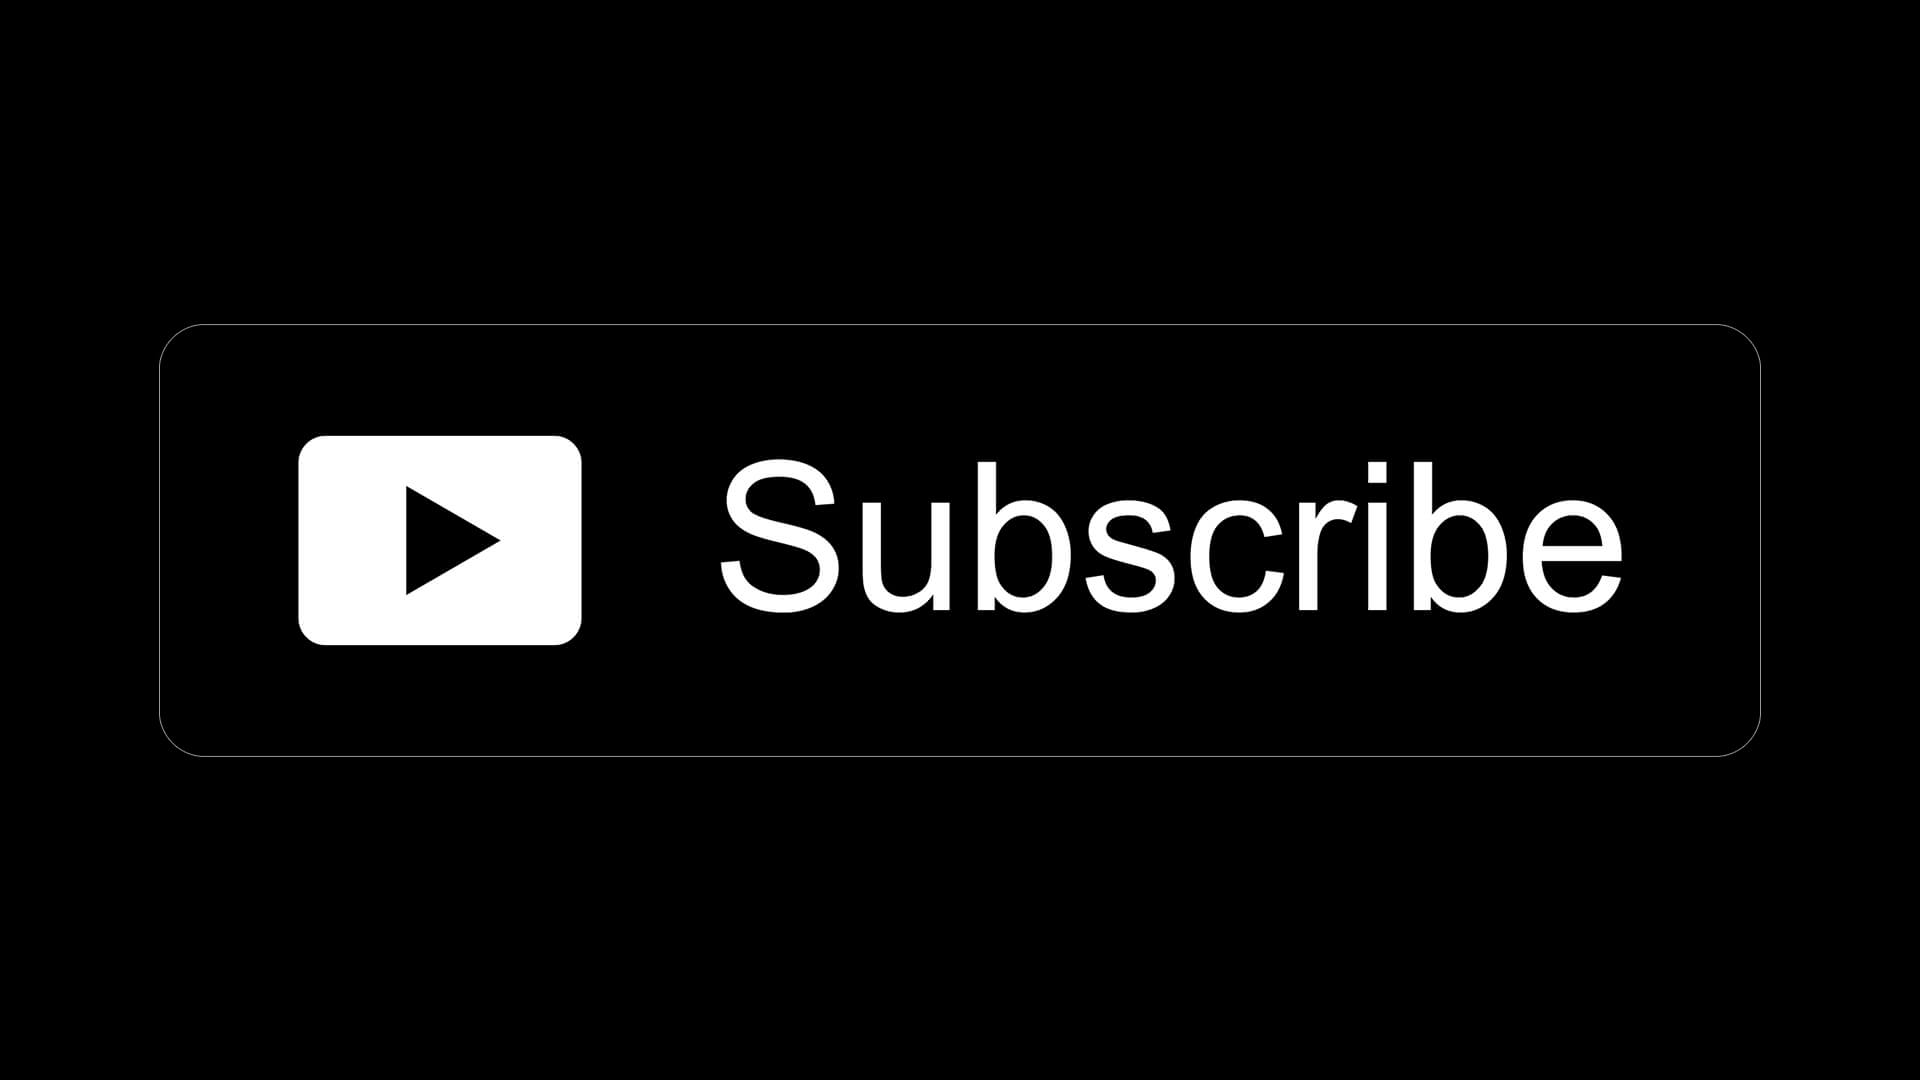 Free Black YouTube Subscribe Button PNG Download By AlfredoCreates 11